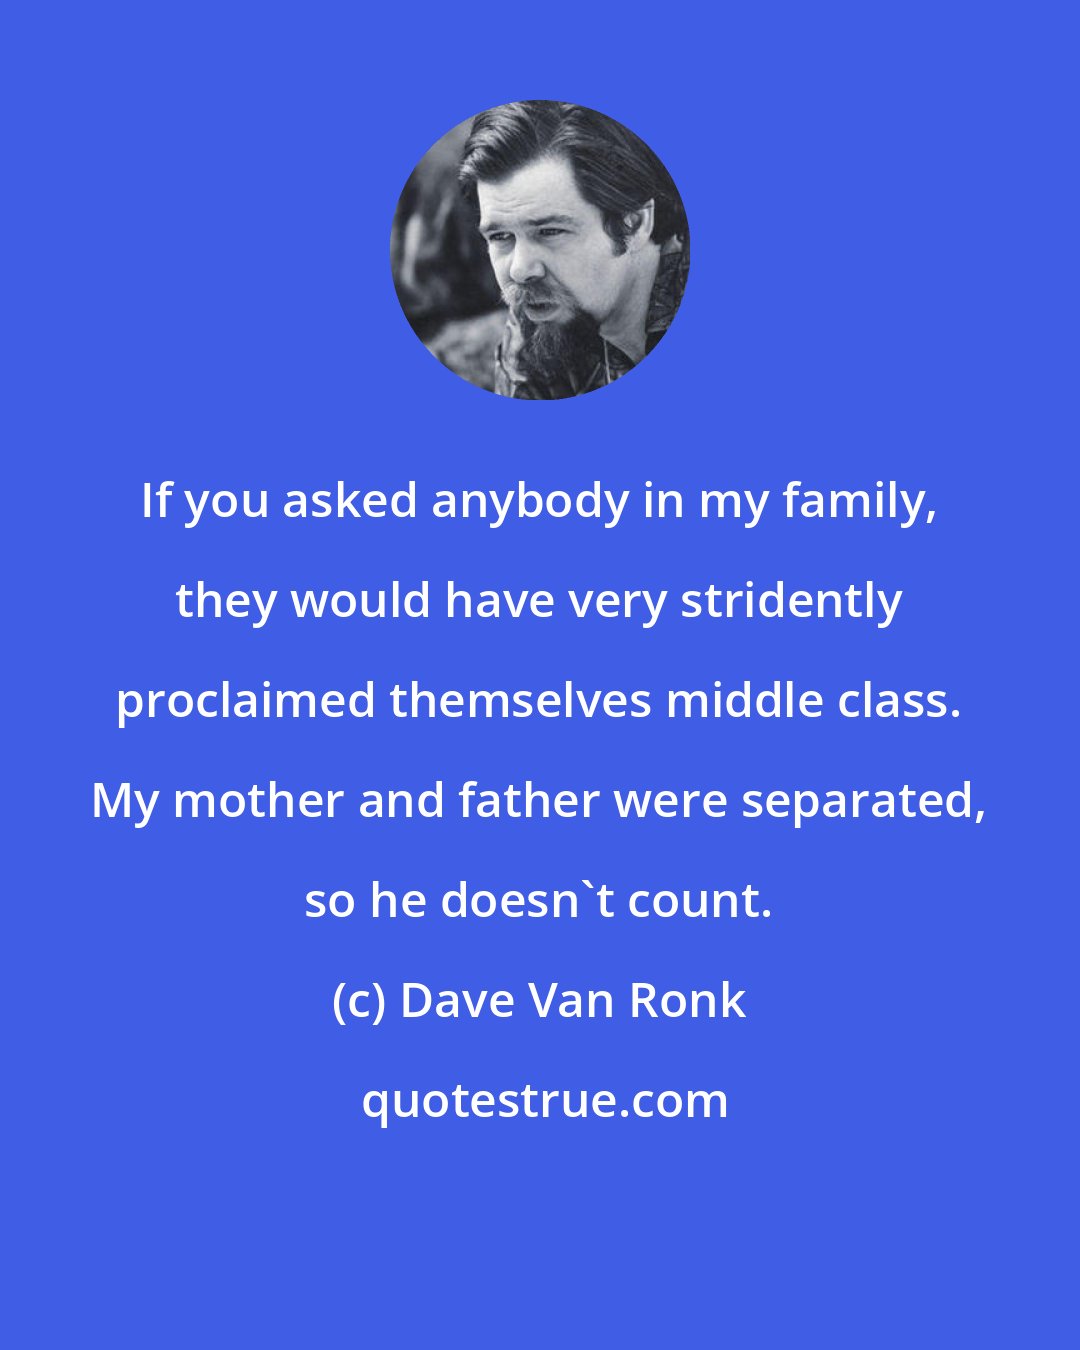 Dave Van Ronk: If you asked anybody in my family, they would have very stridently proclaimed themselves middle class. My mother and father were separated, so he doesn't count.